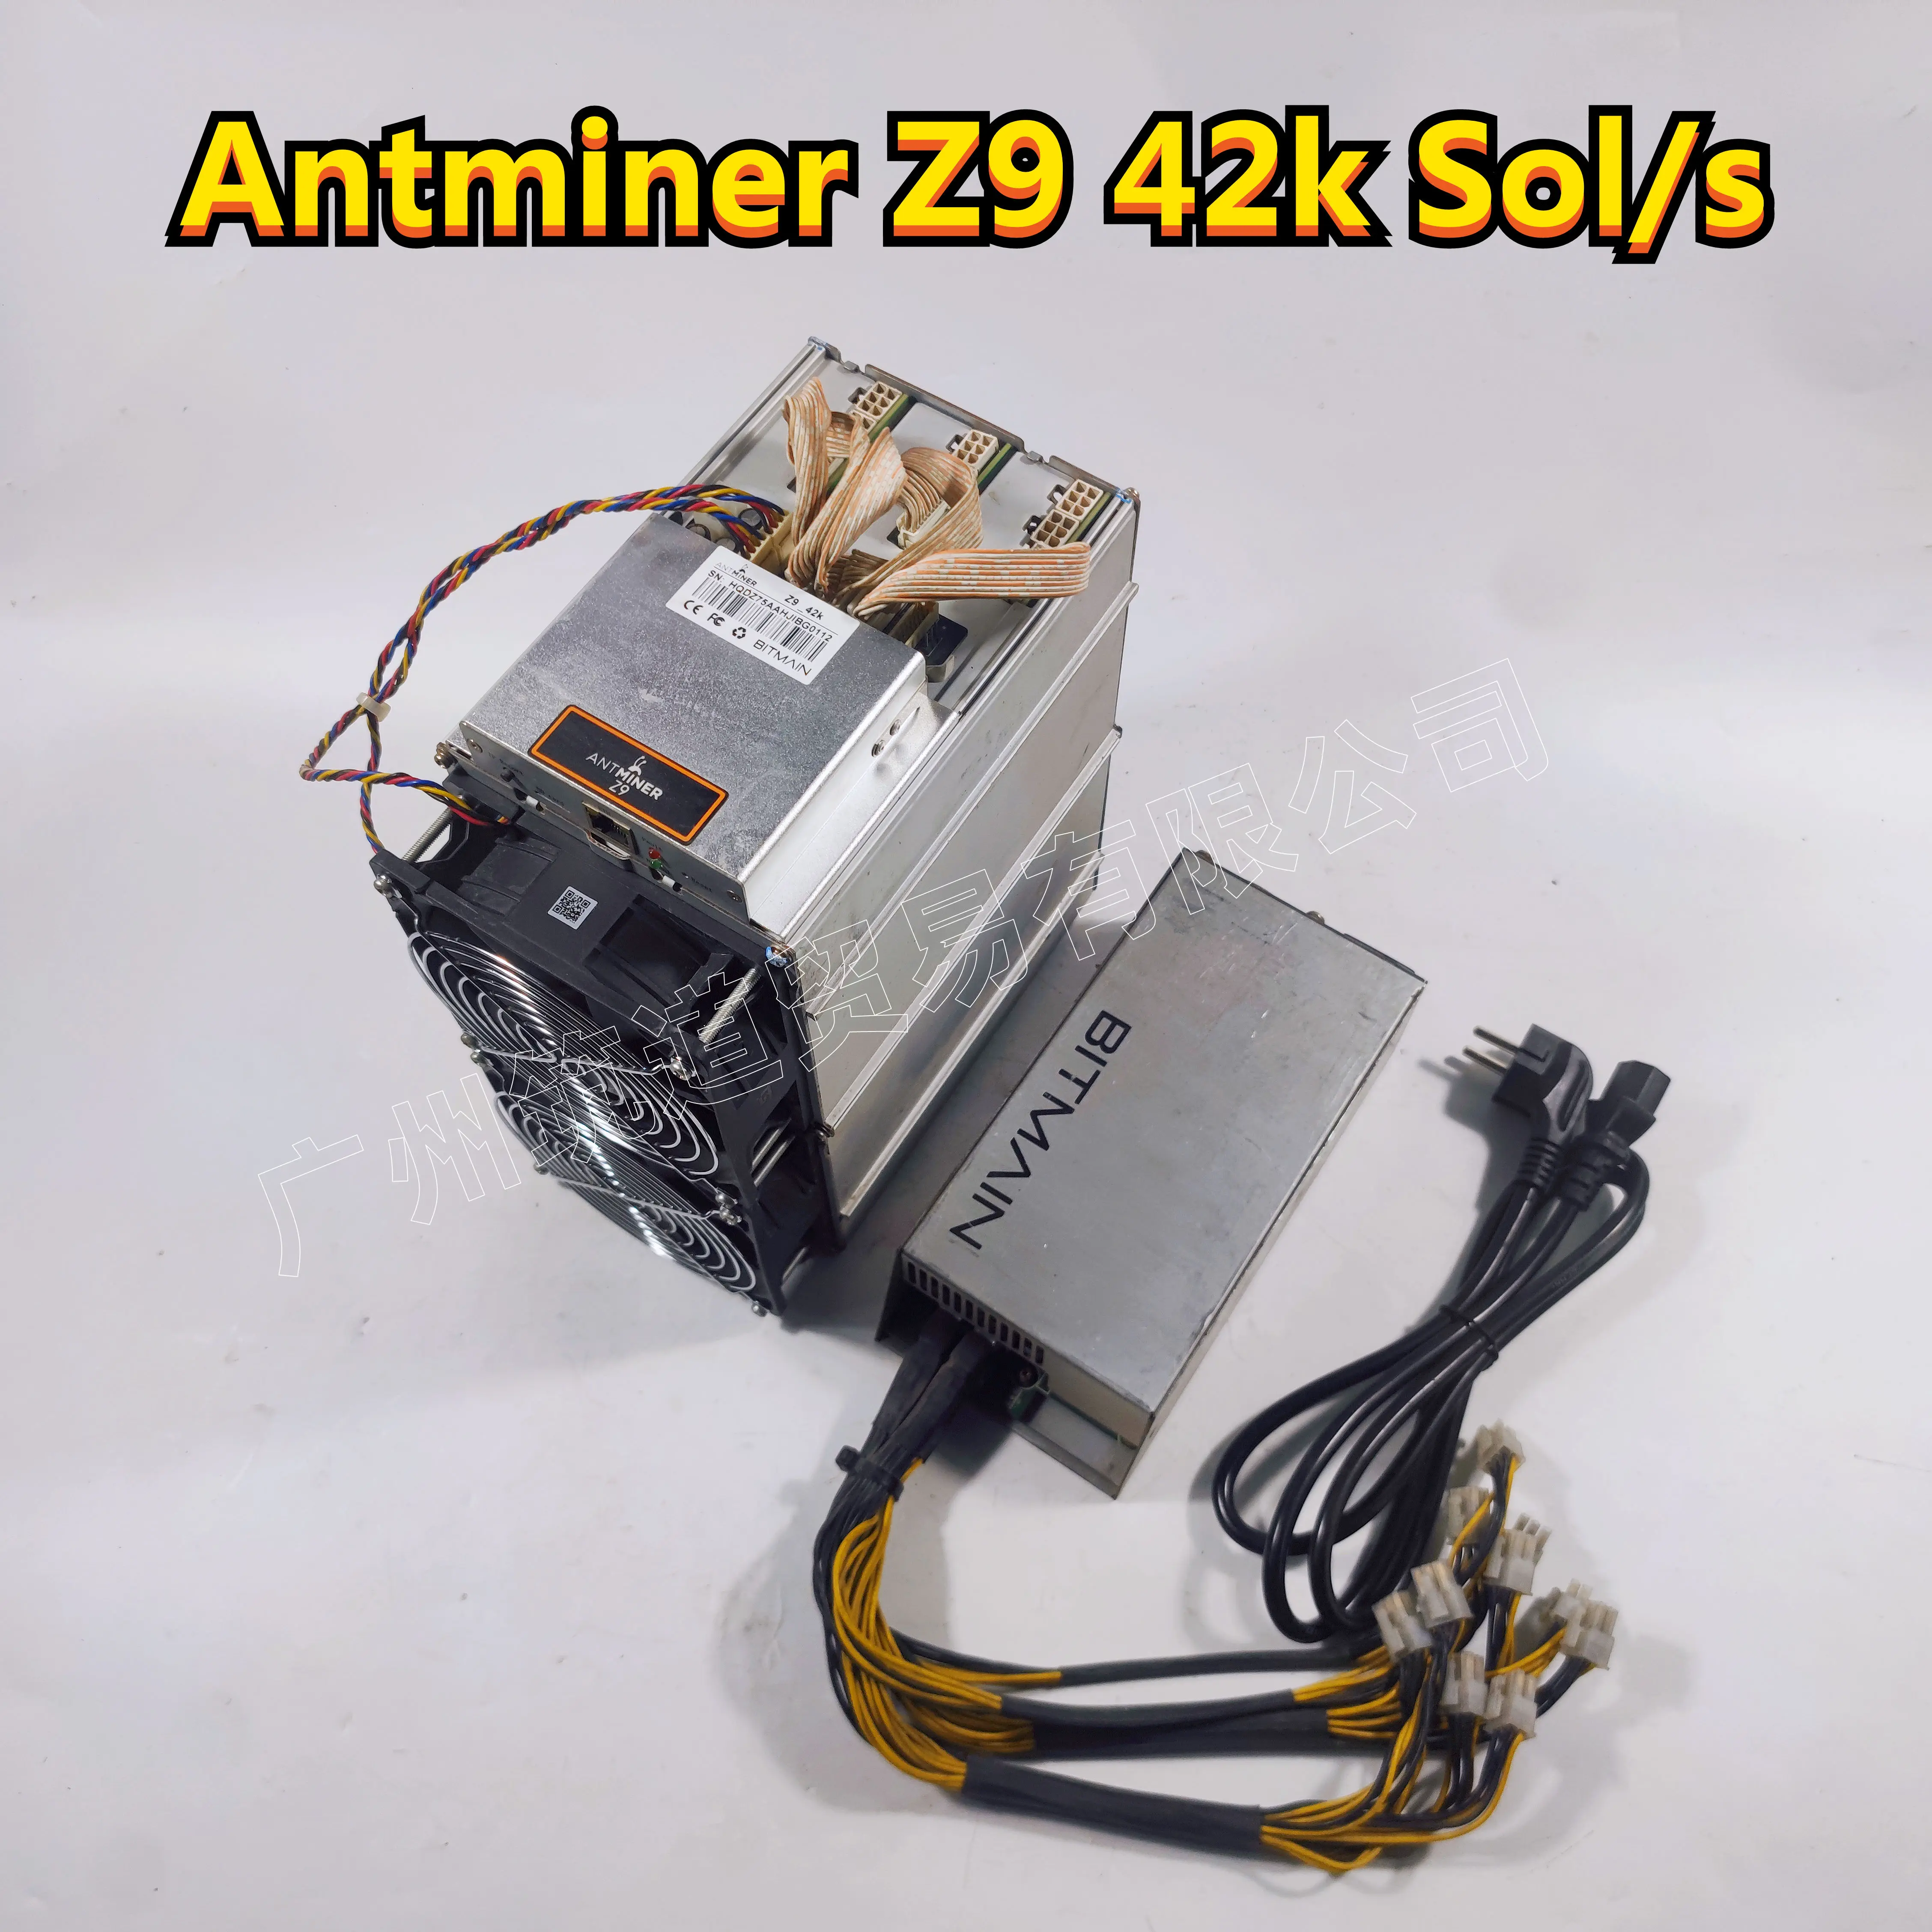 Used Antminer Z9 42k Sol/s With BITMAIN APW3 1600W PSU Asic Equihash Miner Better Than Innosilicon A9 Mini,ZEC ZEN